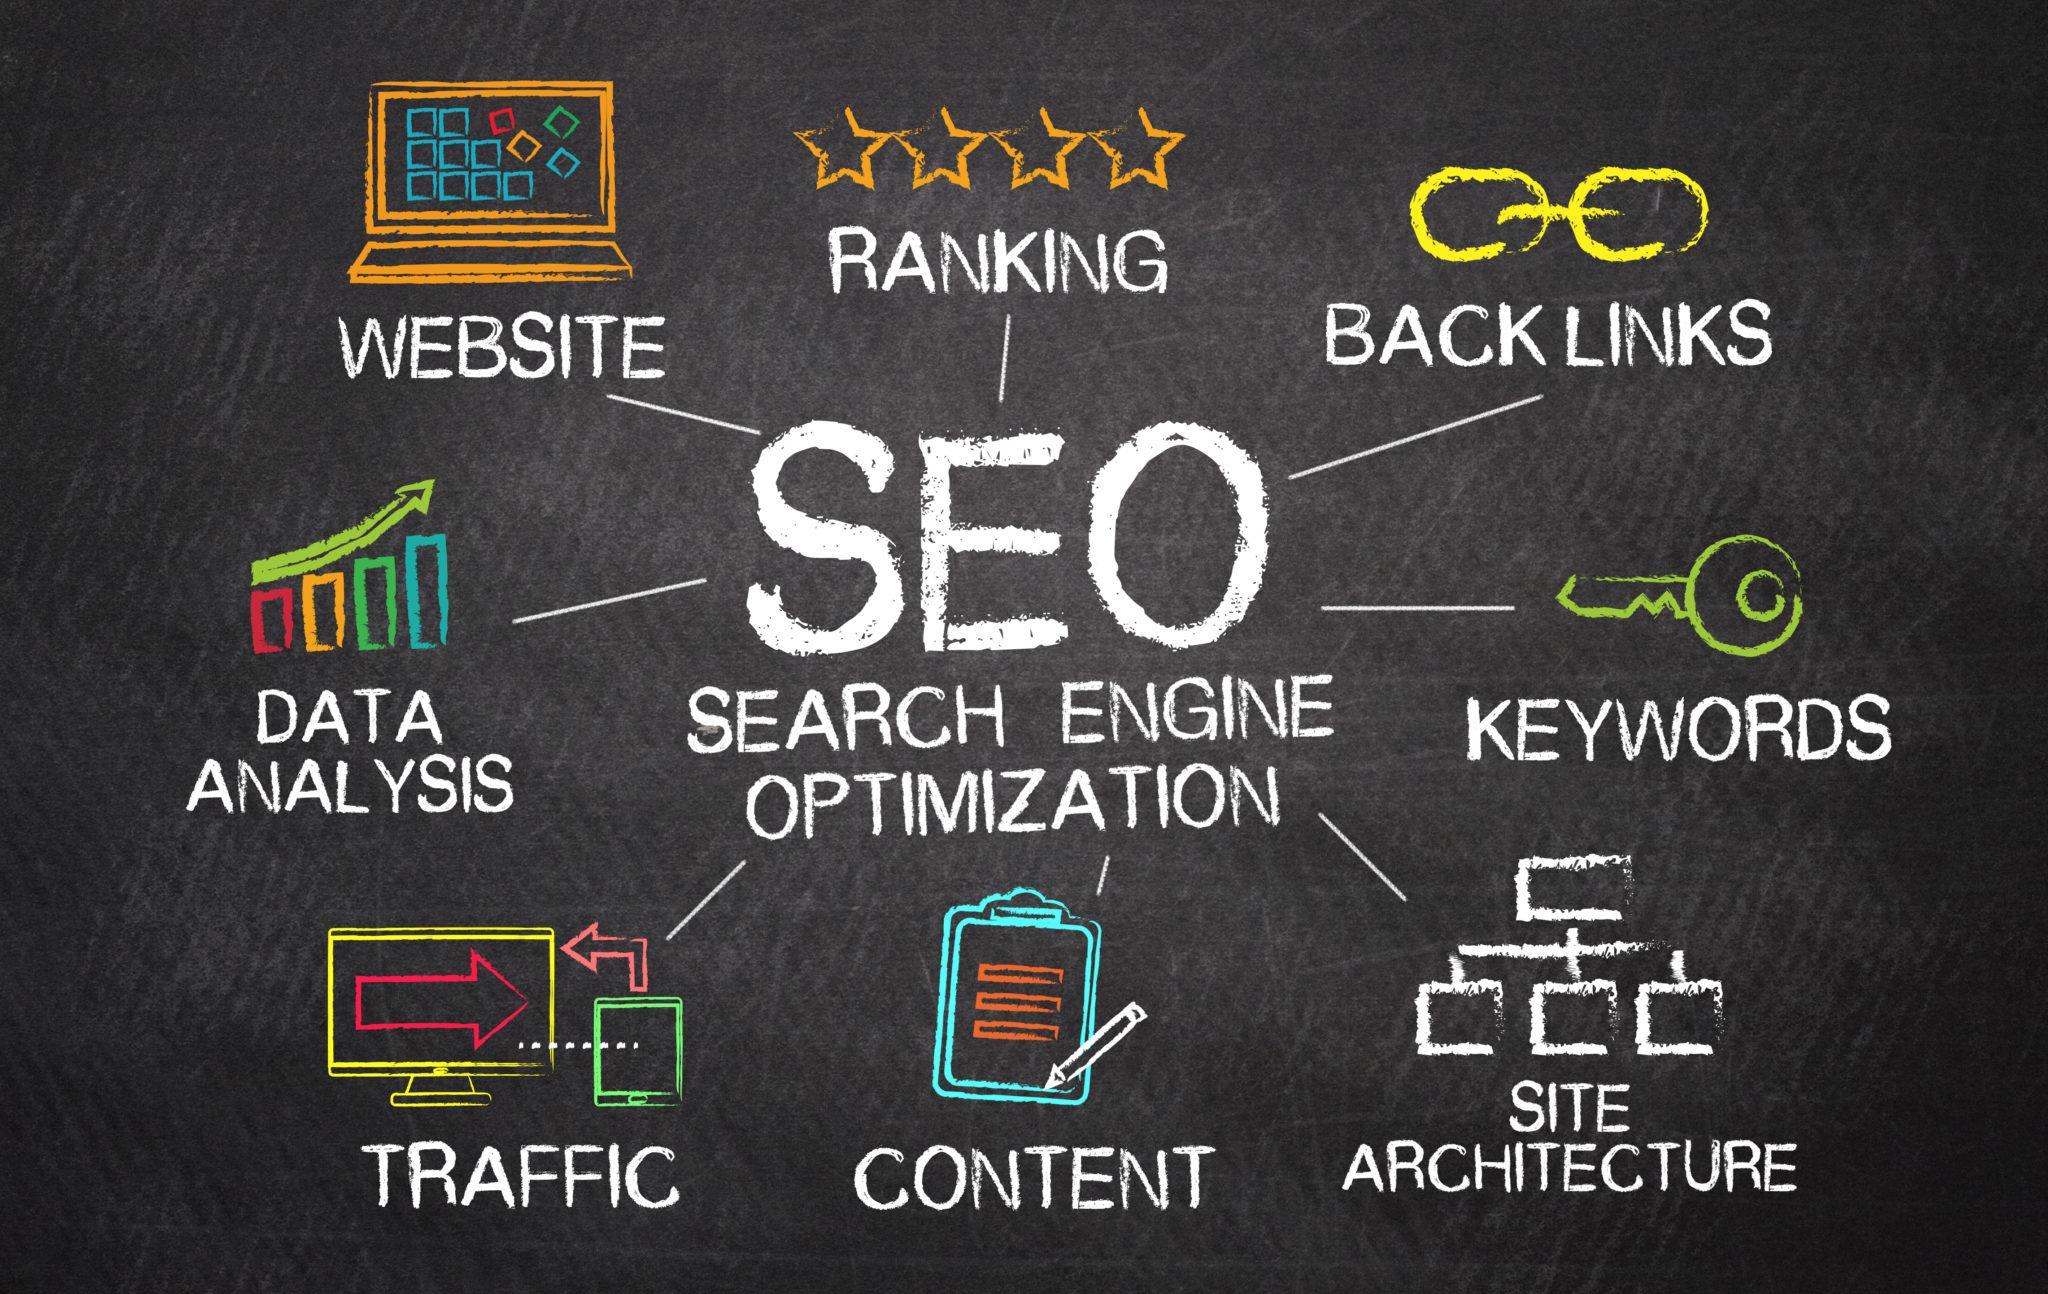 Few tips for growing an online business using SEO services